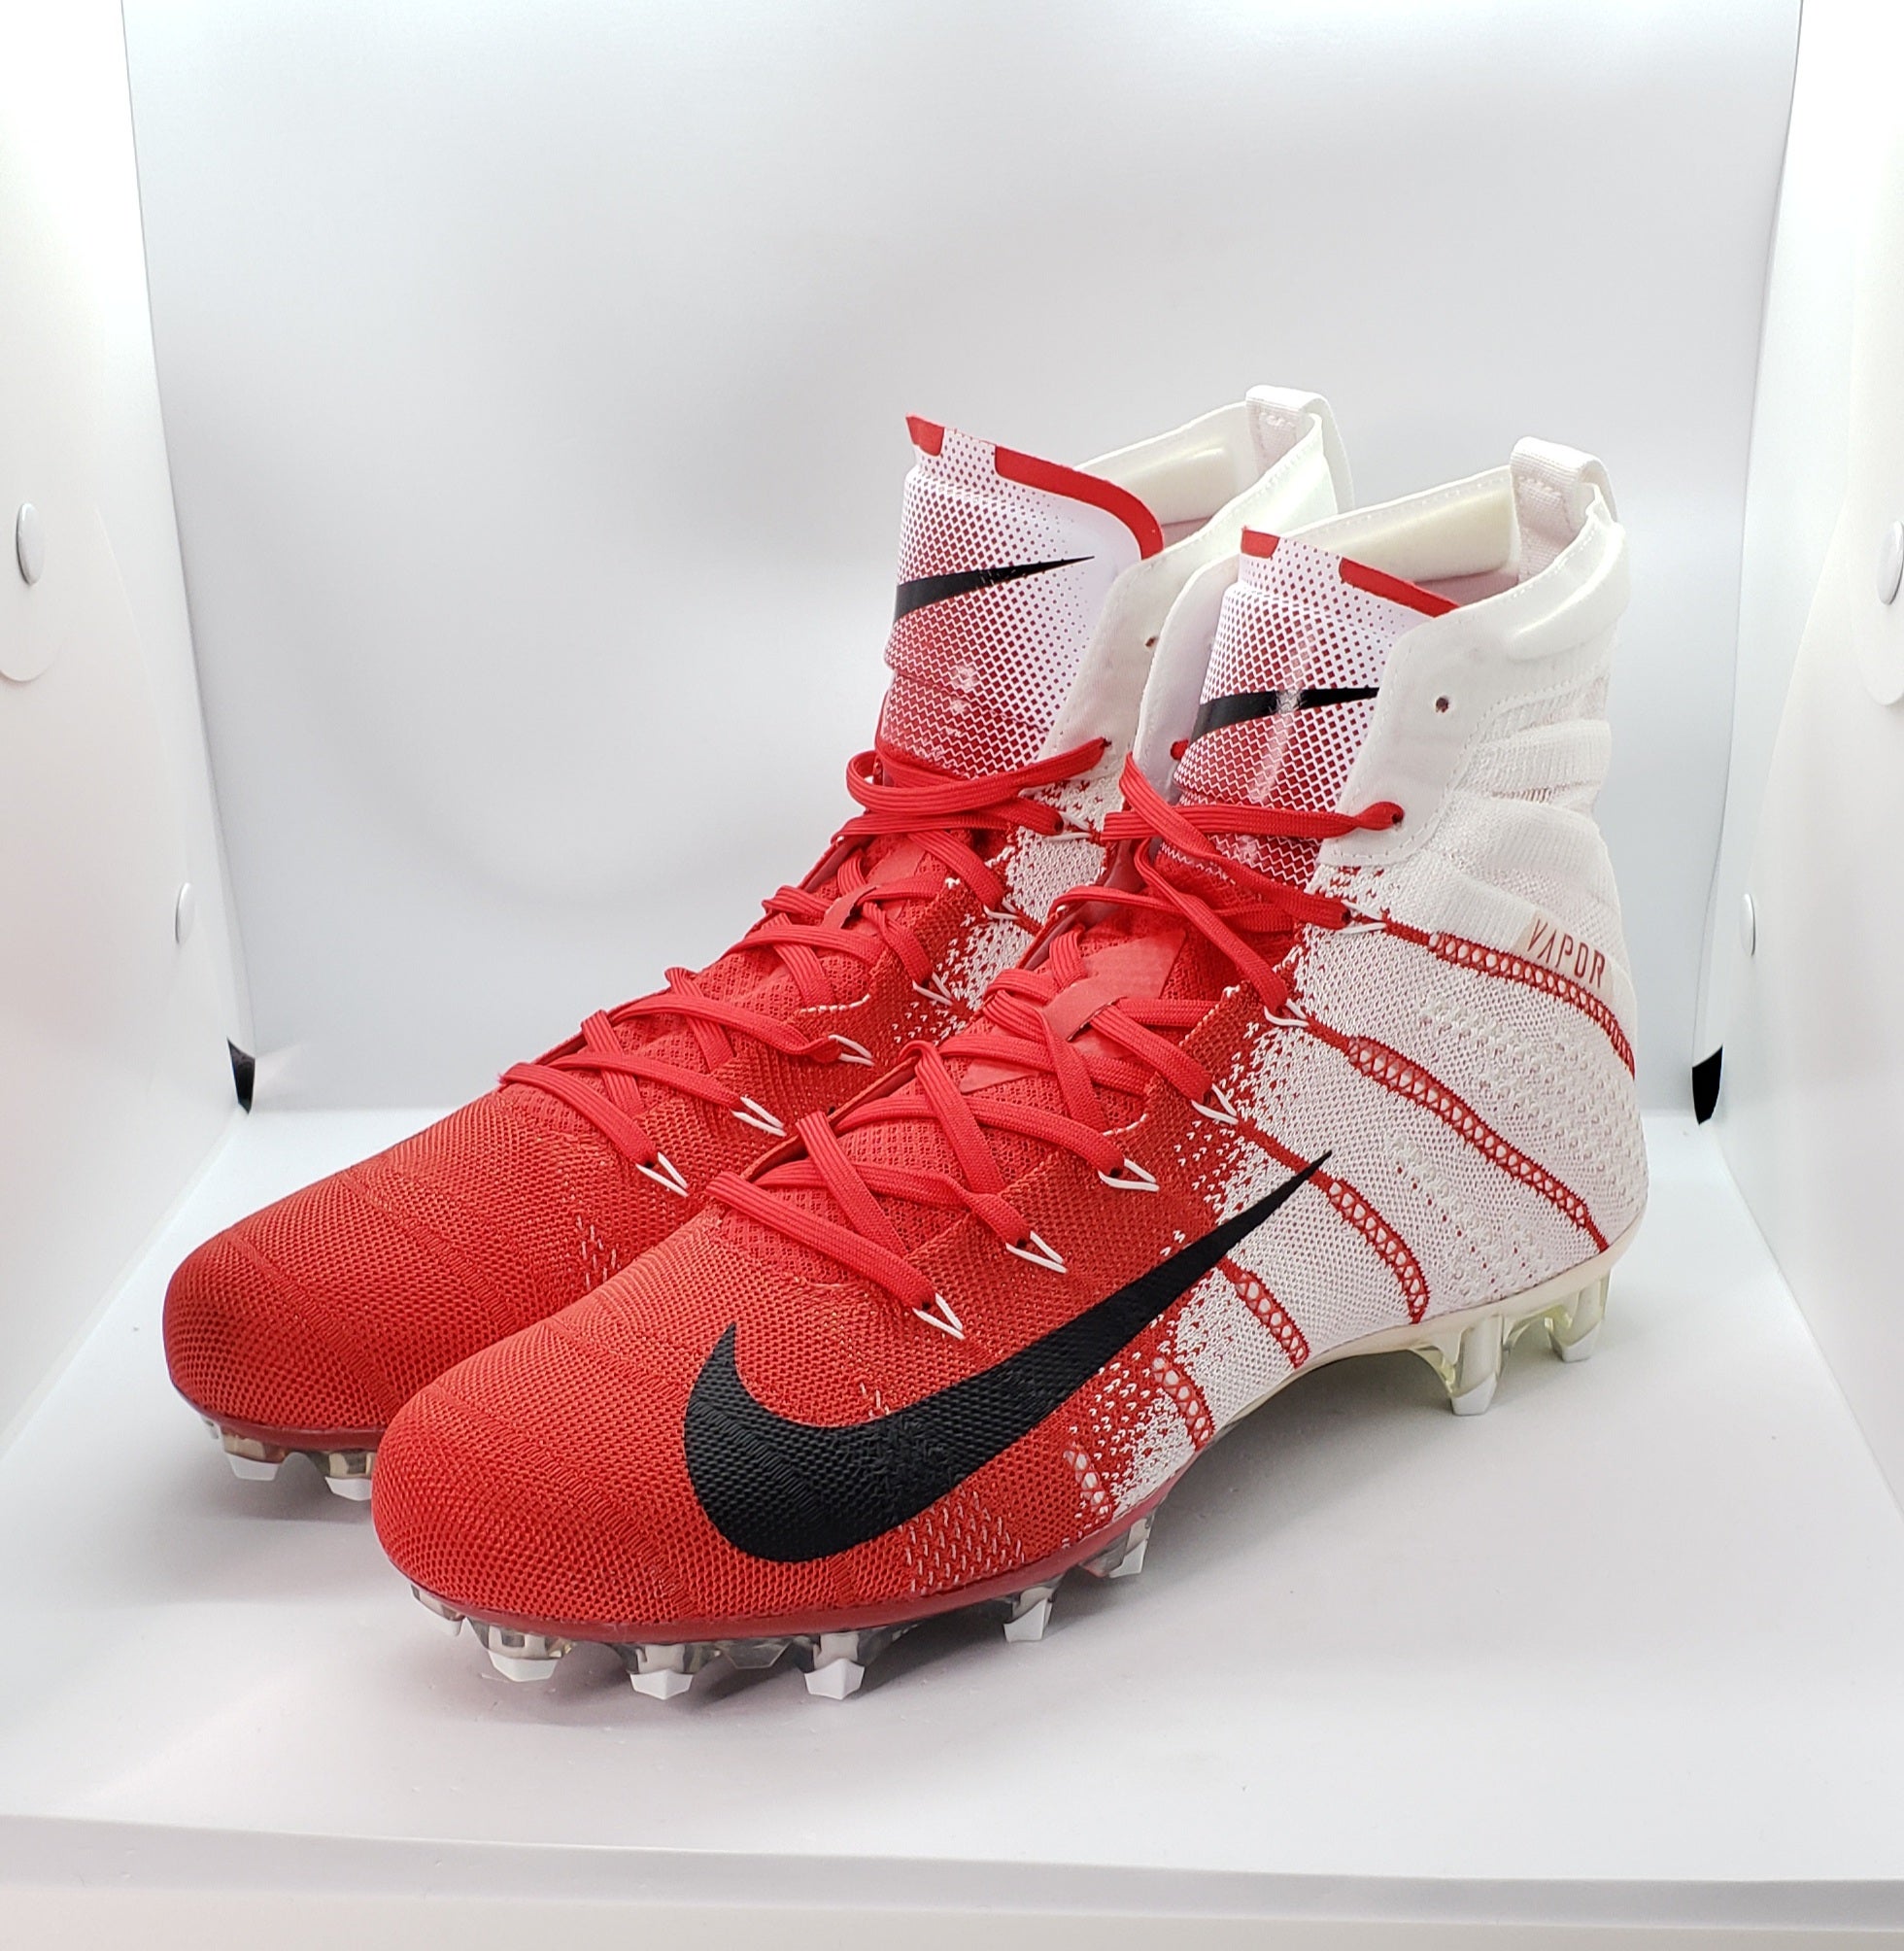 Nike Vapor Untouchable 3 Elite Football Cleats White Gym Red SZ 12.5  AO3006-160 for Sale in The Bronx, NY - OfferUp